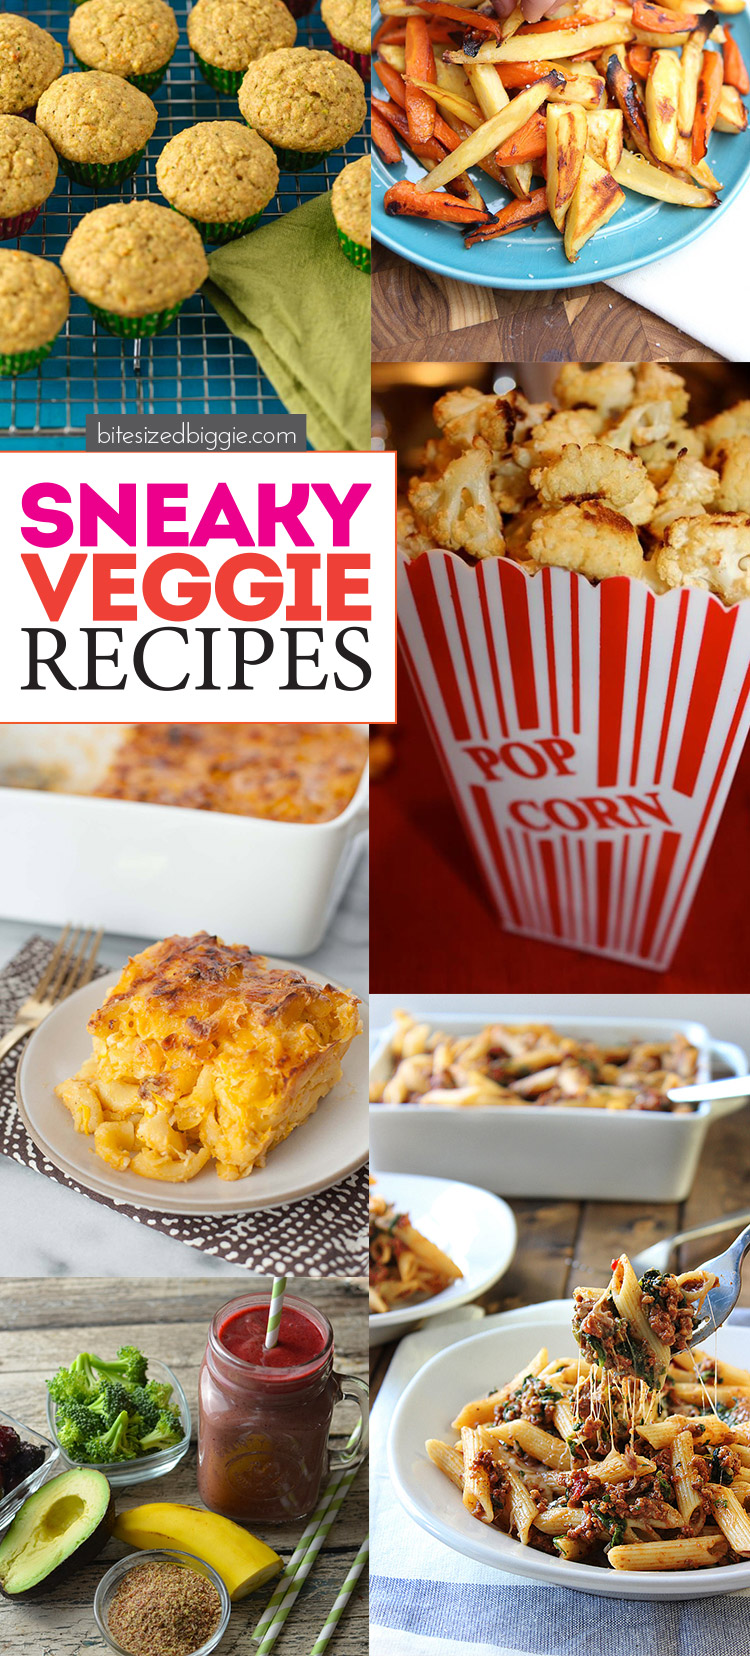 Sneaky veggie recipes - your guests will have no idea how healhty these are (unless you tell them) because these are SO DELICIOUS!